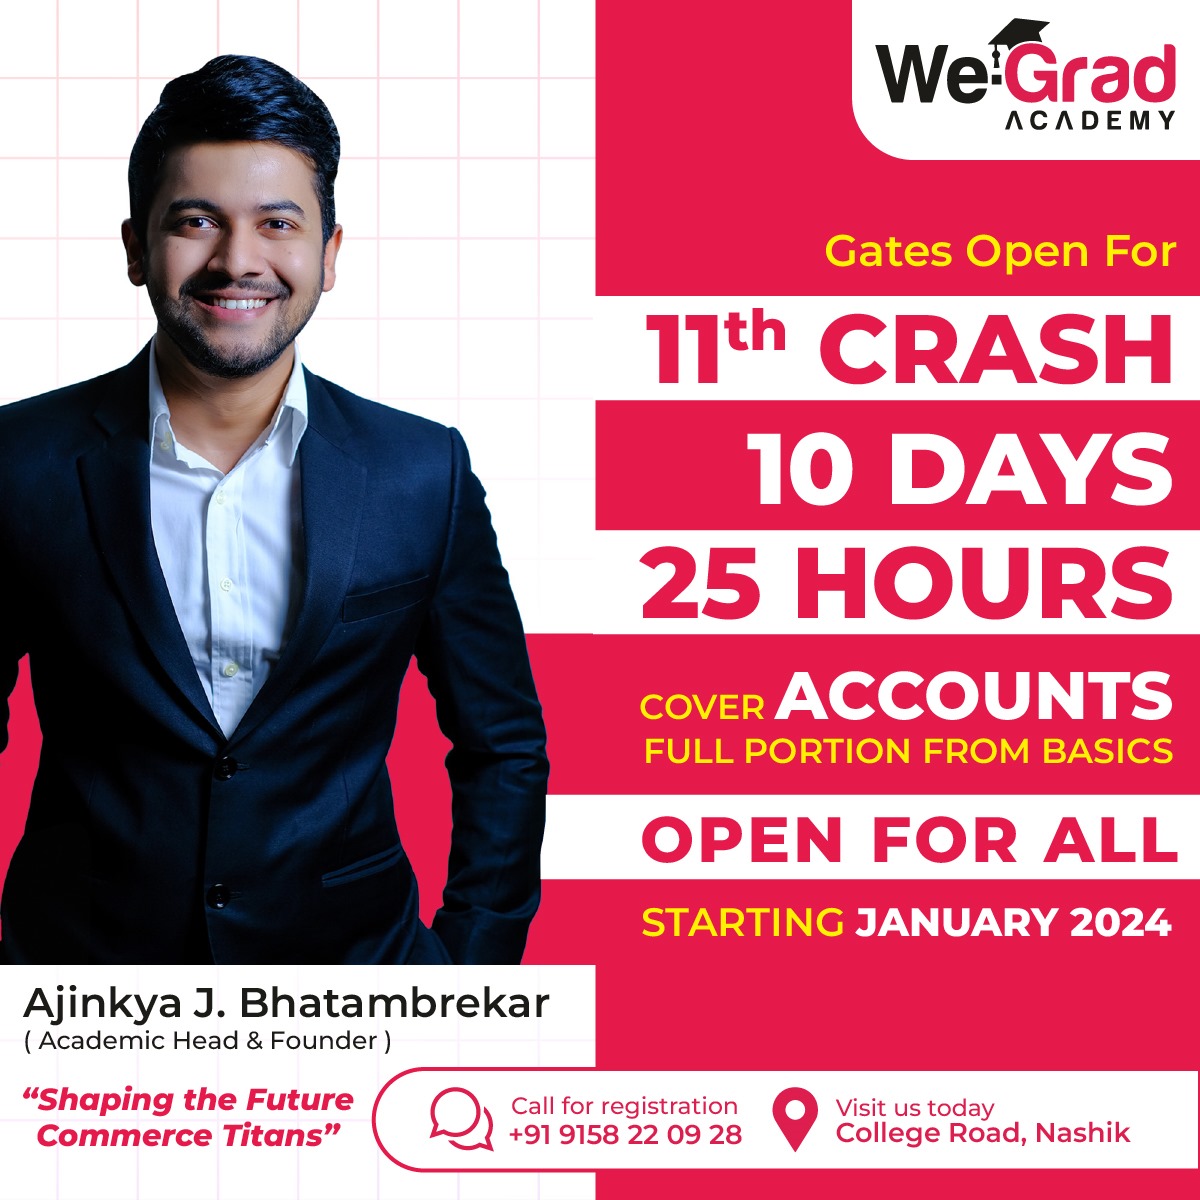 Accounts Mastery in 10 Days!

#CrashBatch #accounts #AccountsManagement #hscstudent #hscboards #hscclasses #hsccommerce #accounts #accountsclass #accountsclasses #commerceacademy #EnrollNow #enroltoday #exampreparation #boards #commerce #commercestudents #12thboards #admission